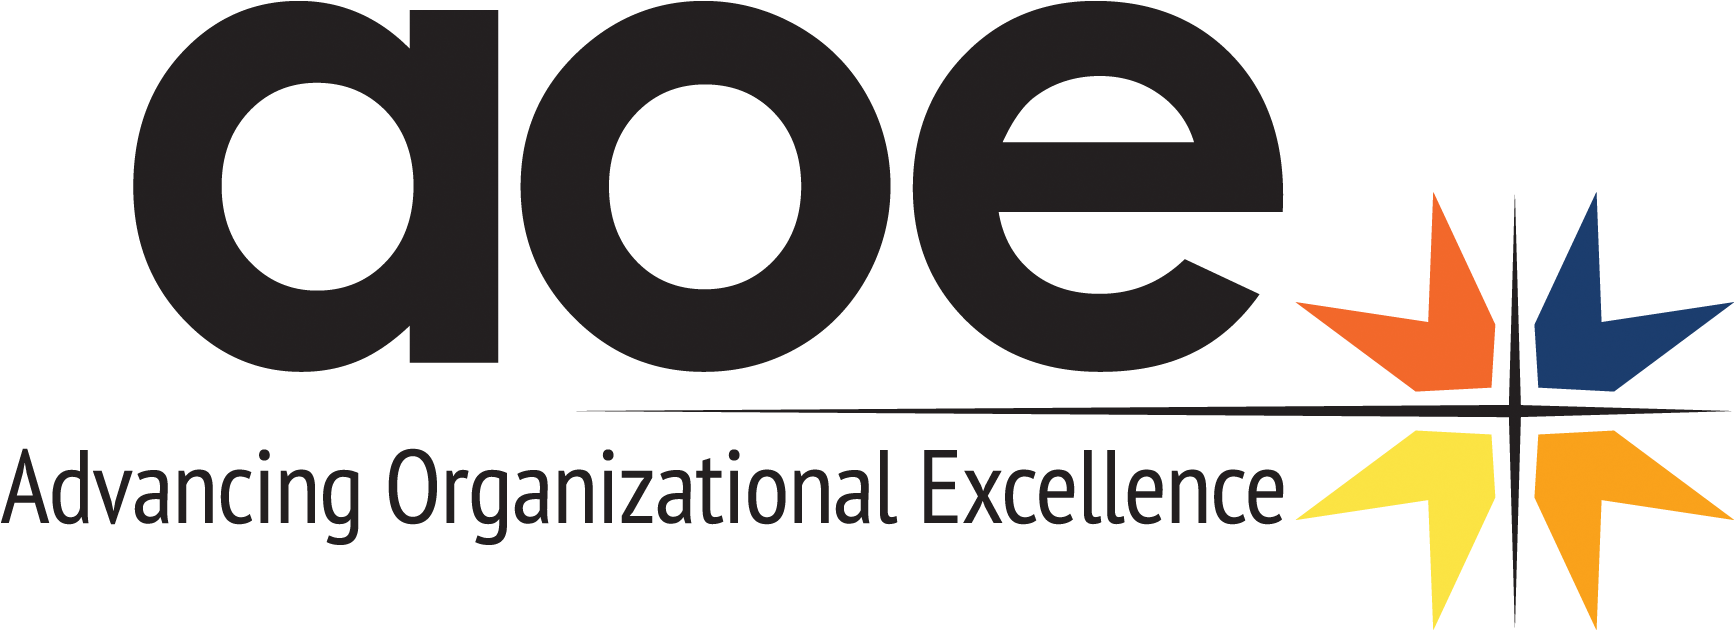 The Aoe Team - The Advancing Organizational Excellence Team (1800x750)